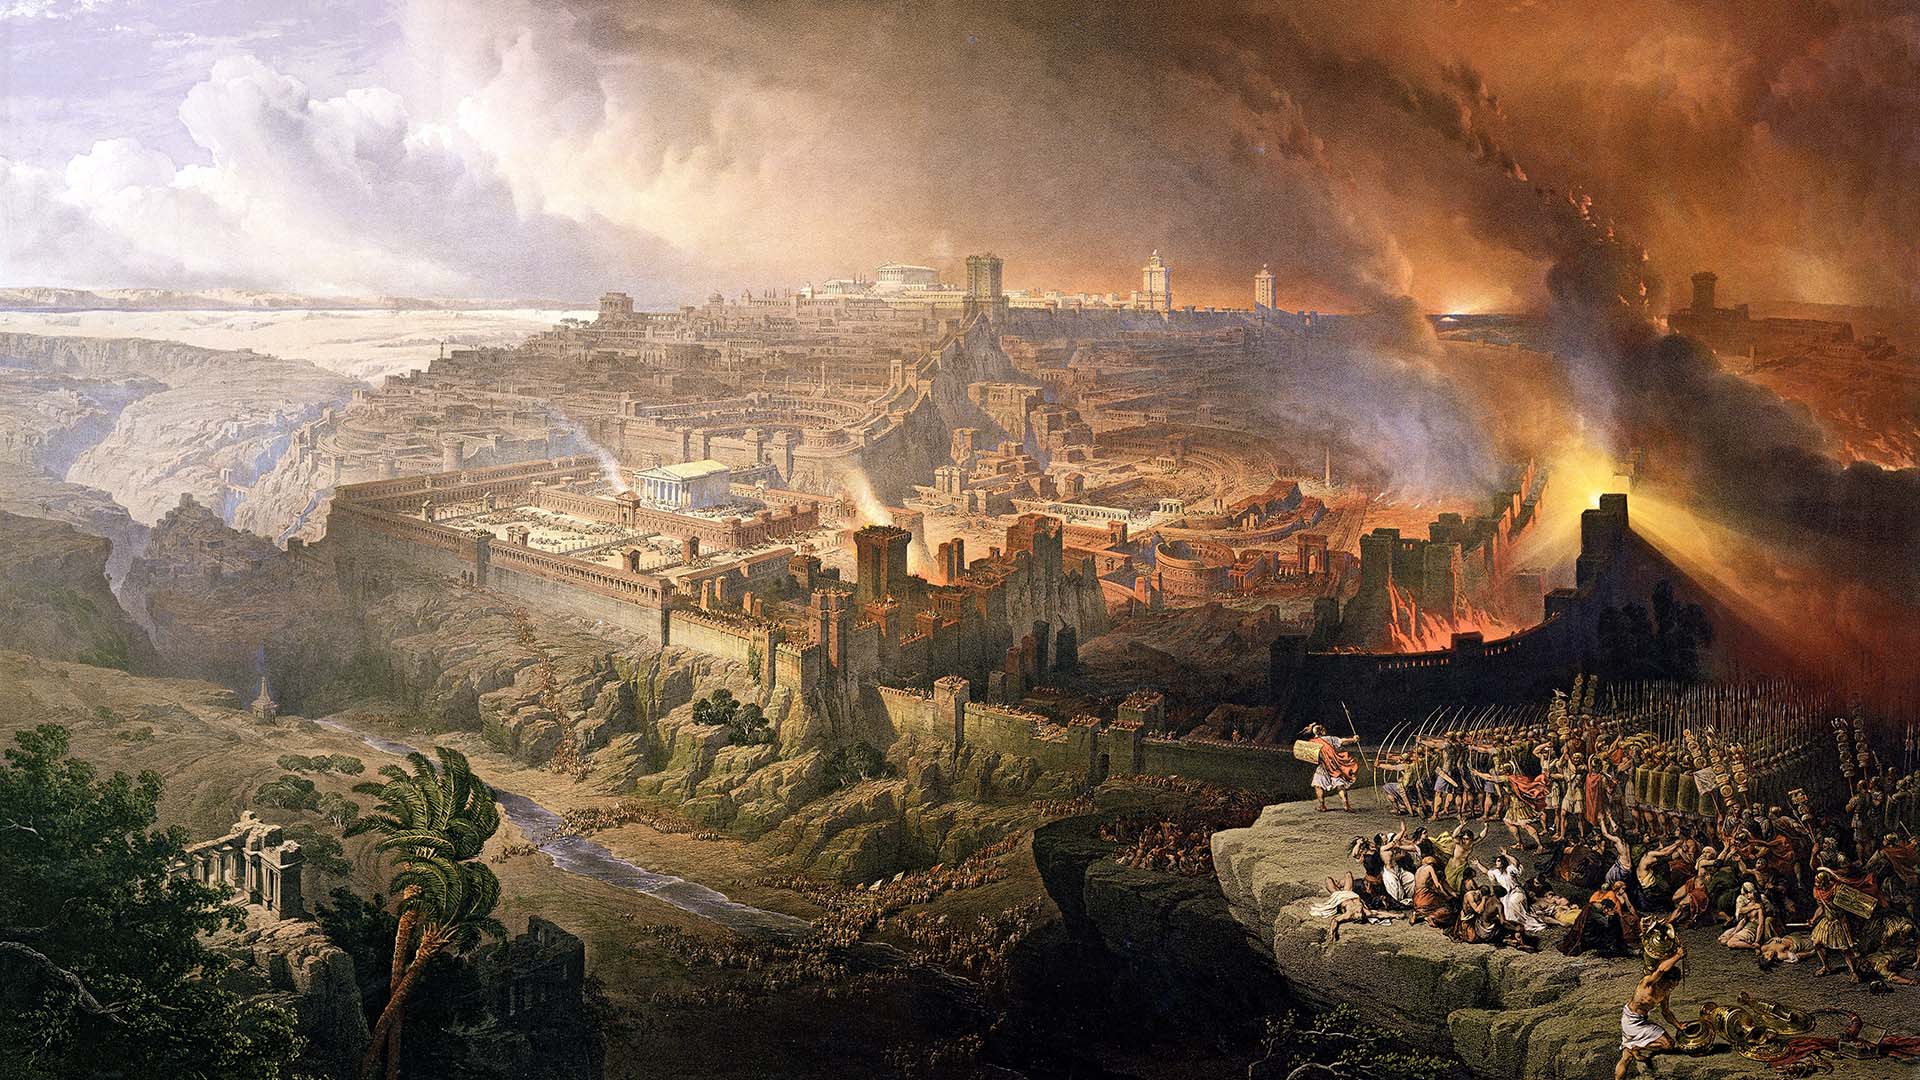 The Siege and Destruction of Jerusalem by the Romans Under the Command of Titus, A.D. 70. Painting by David Roberts, 1850 via Wikimedia Commons.